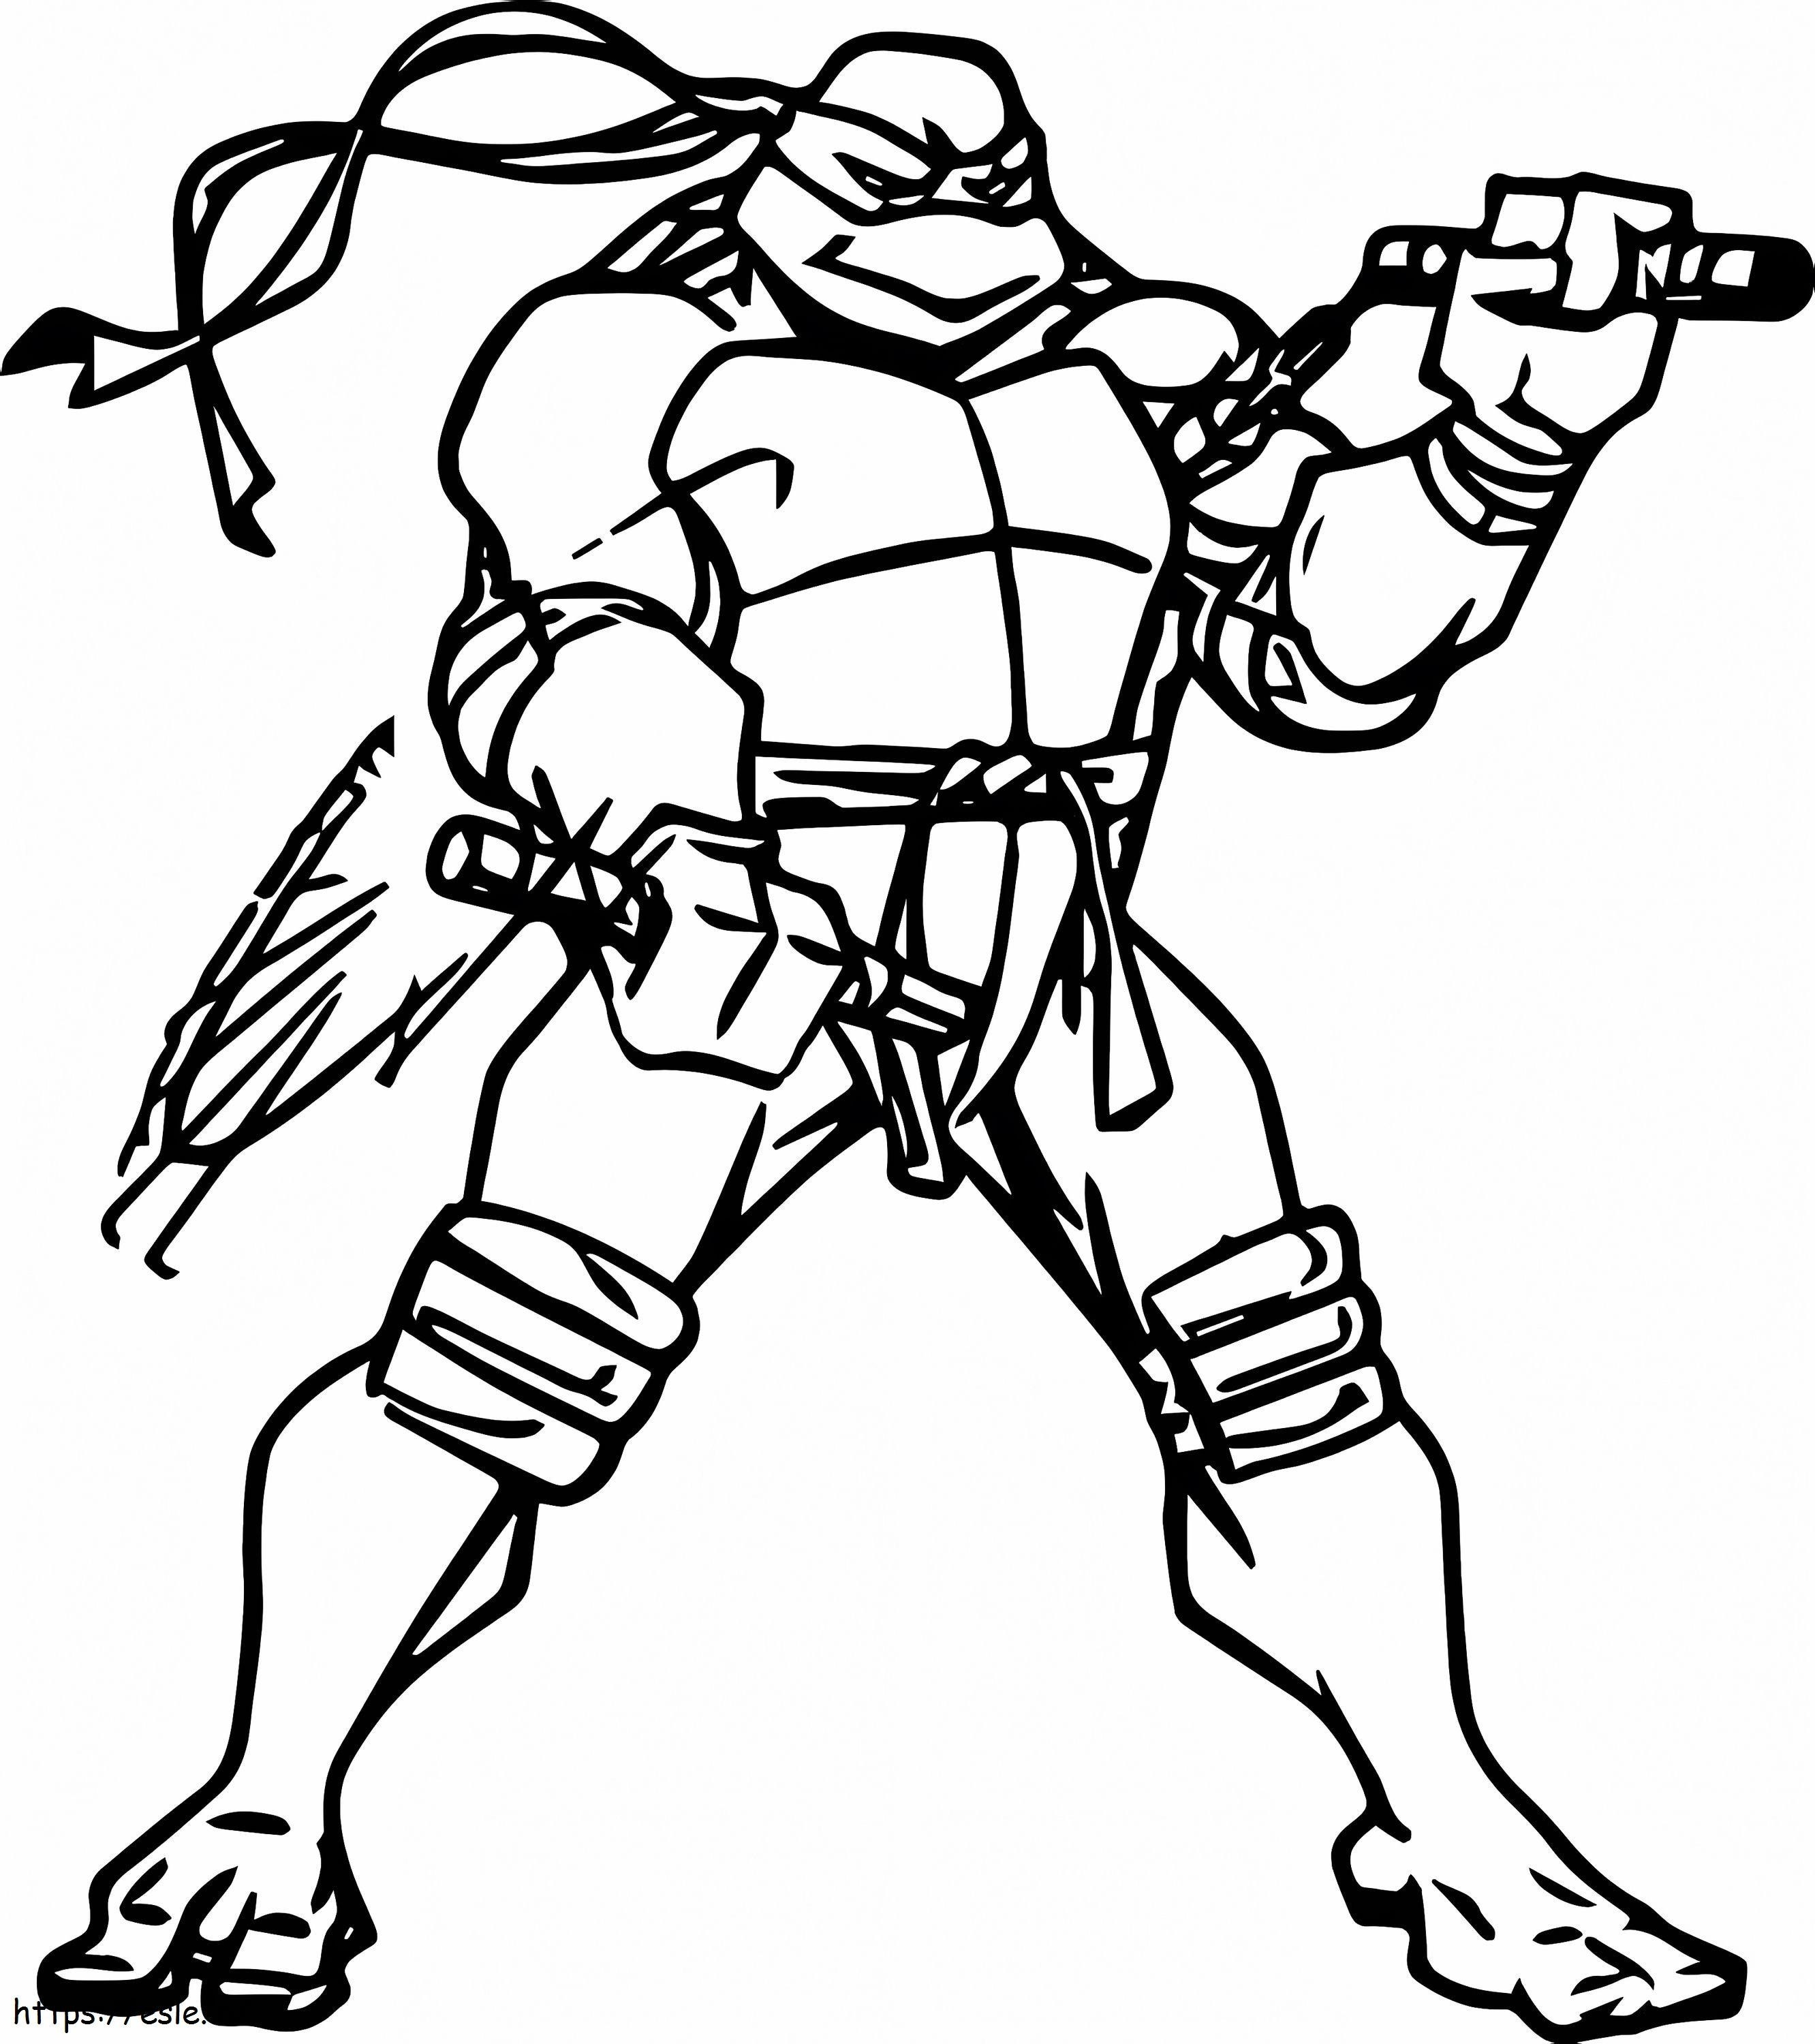 Awesome Michelangelo coloring page